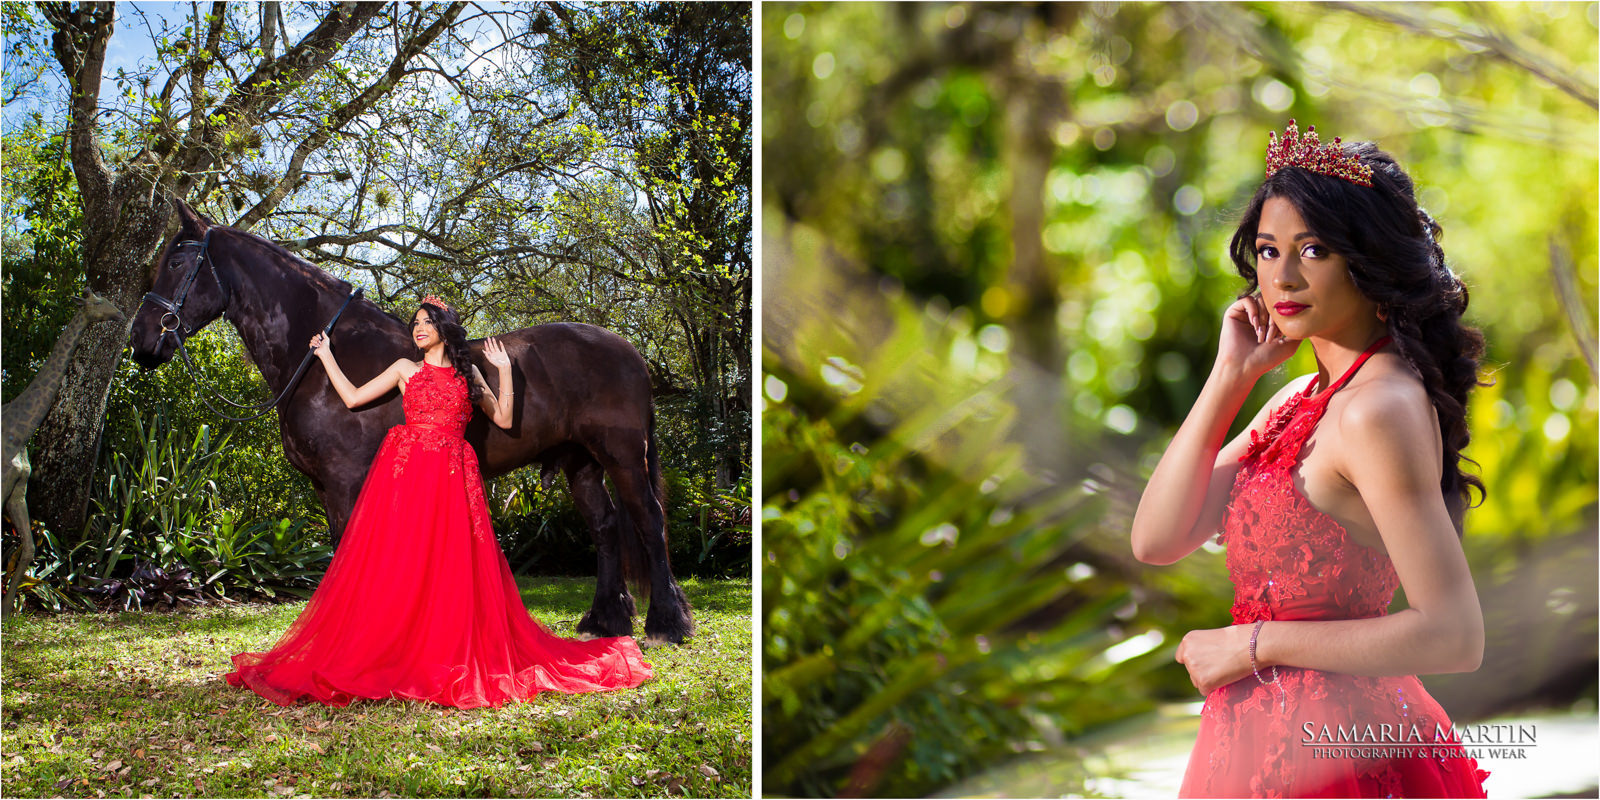 best quinceaneras dresses 2020, Quinceanera photoshoot with a horse, Best quinceaneras pictures, Best photographer in Tampa, Samaria Martin Photographer